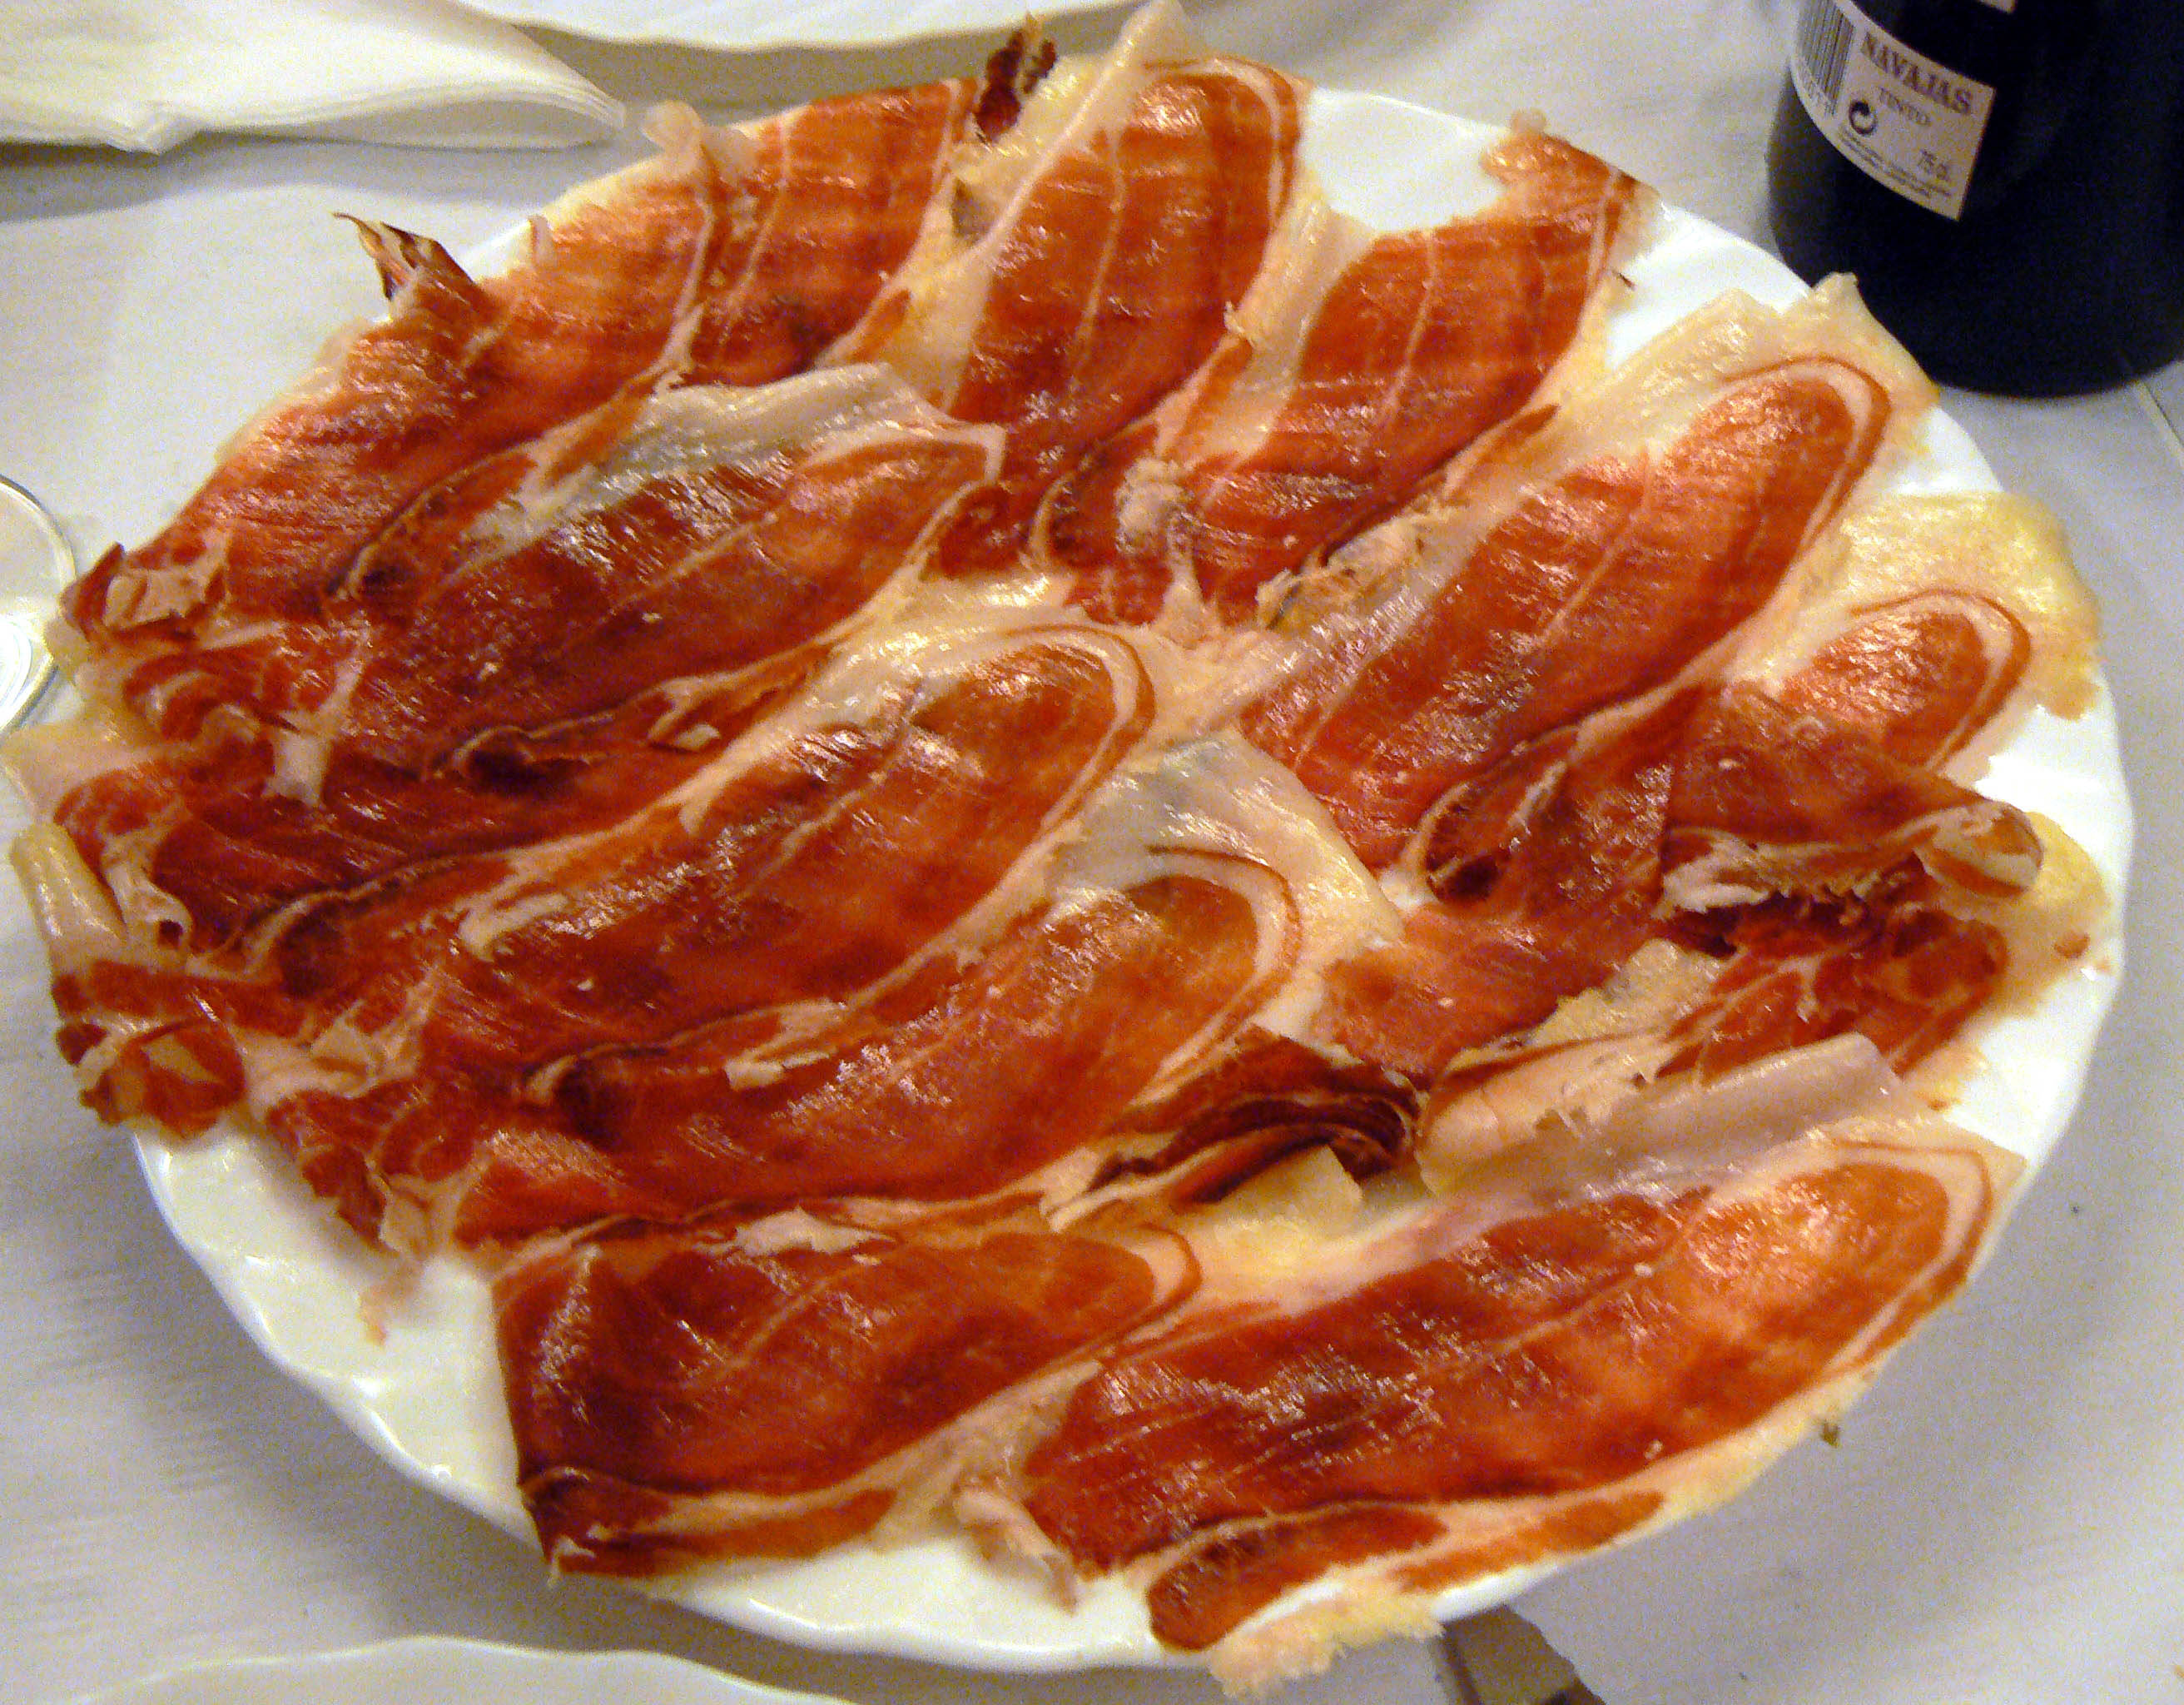 Traditional cuisine from across the globe – Spain